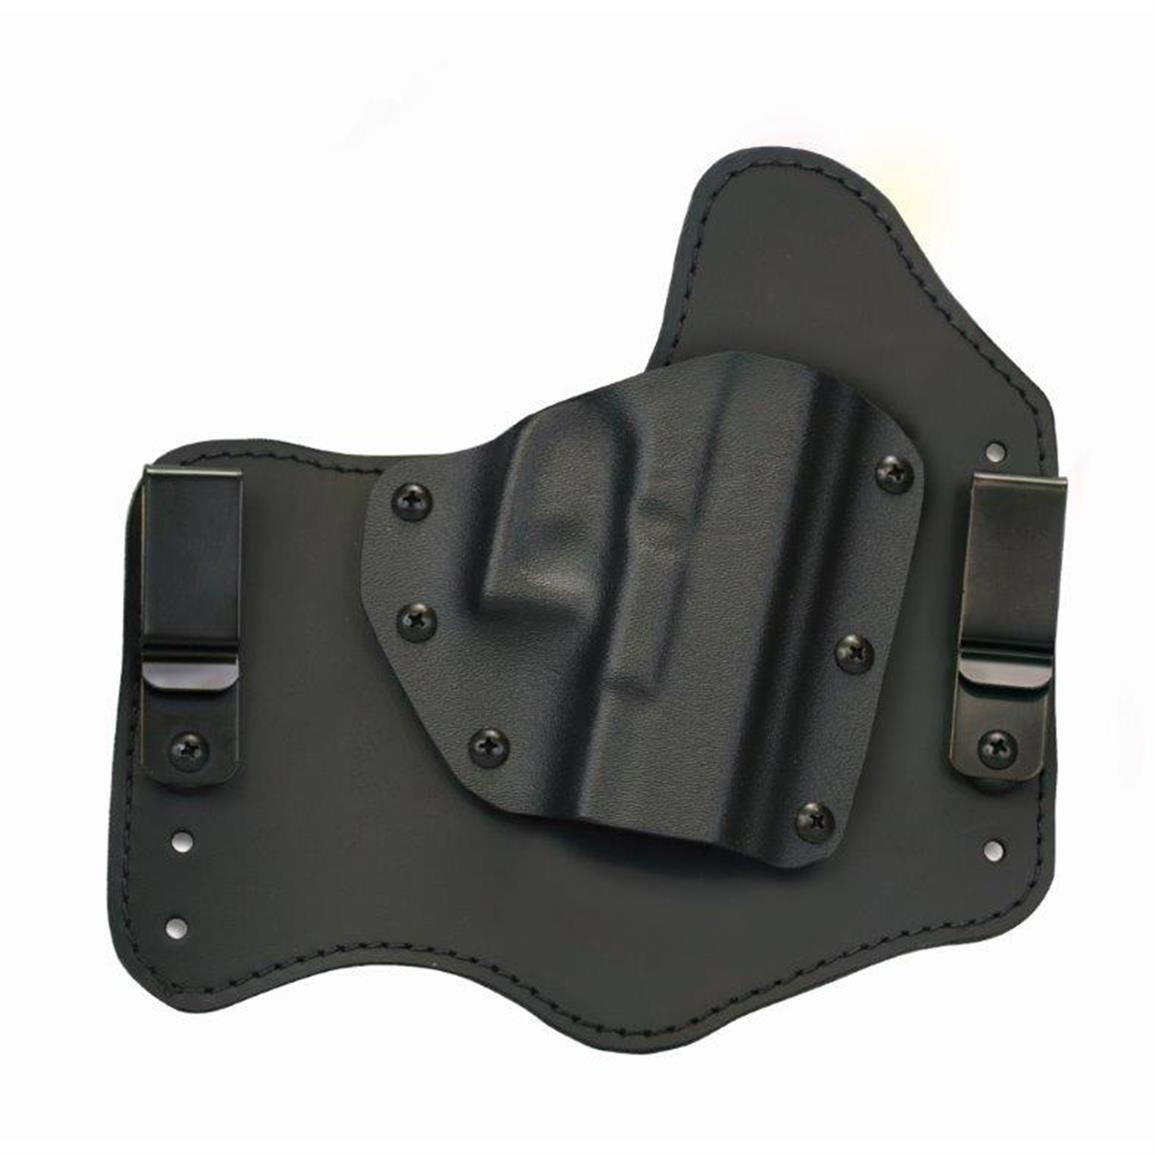 IWB Kydex/Leather Hybrid Holster for Browning